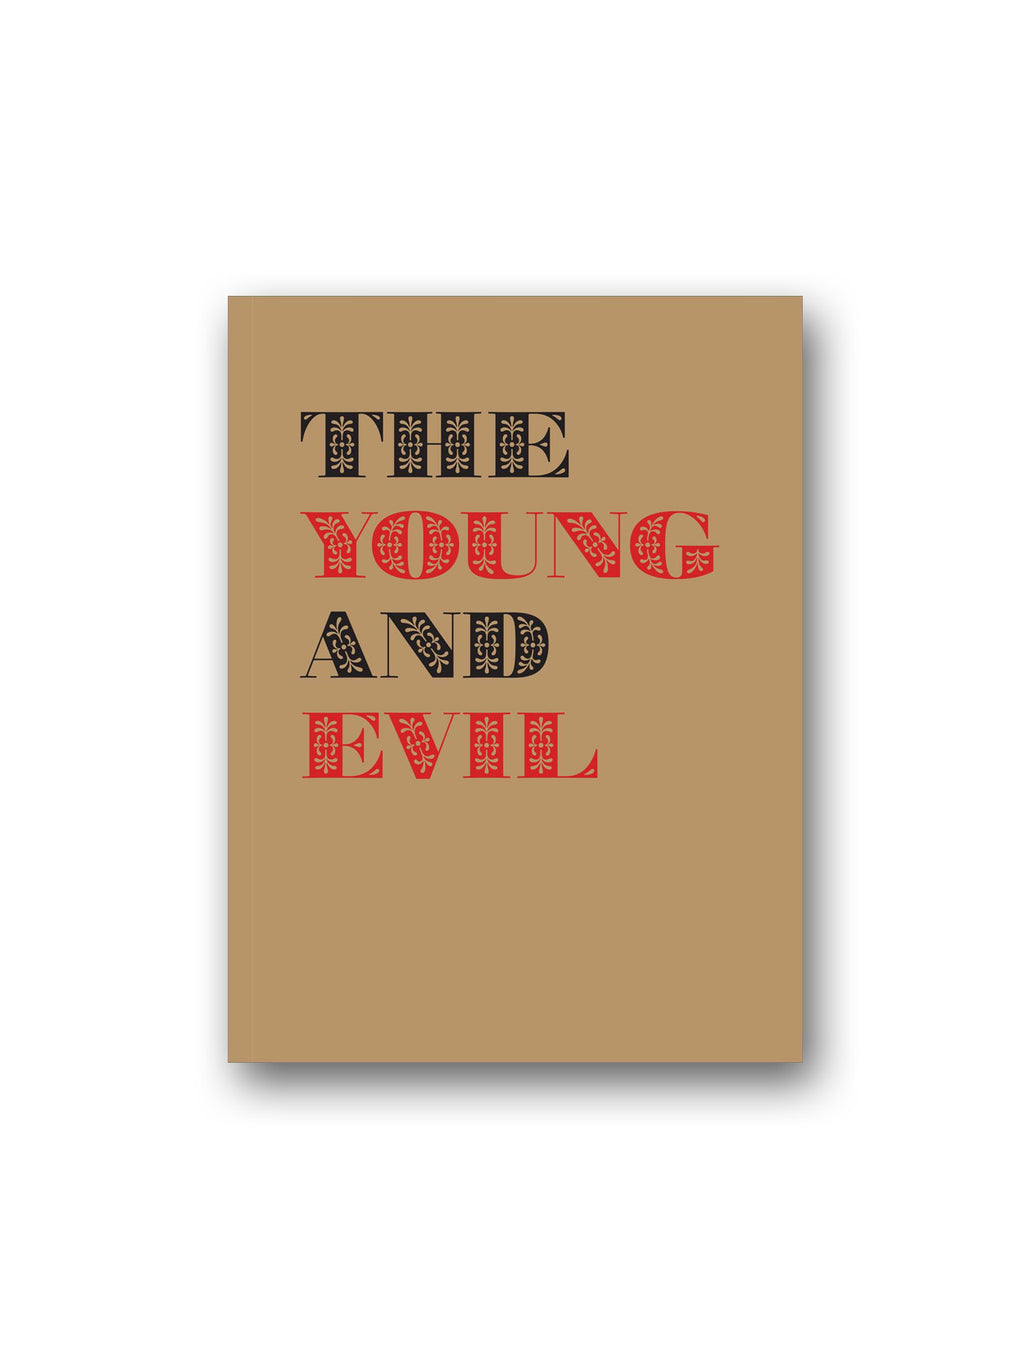 The Young and Evil : Queer Modernism in New York 1930-1955